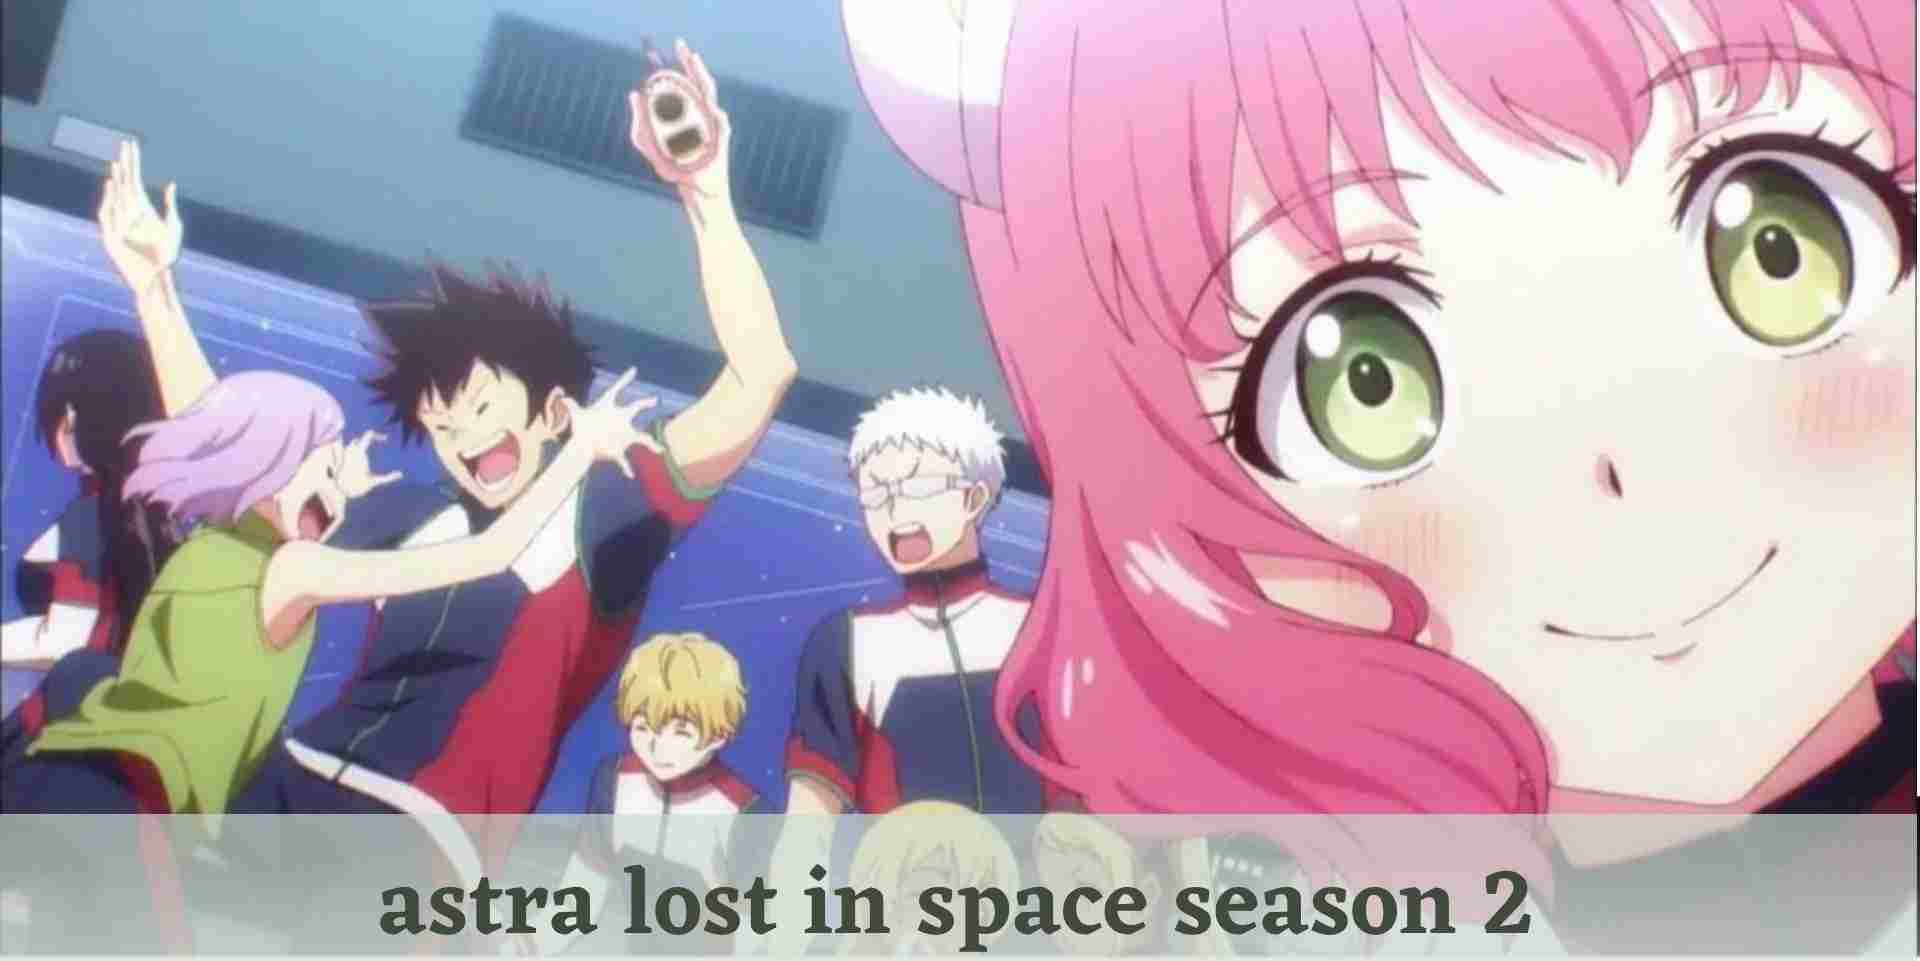 astra lost in space season 2